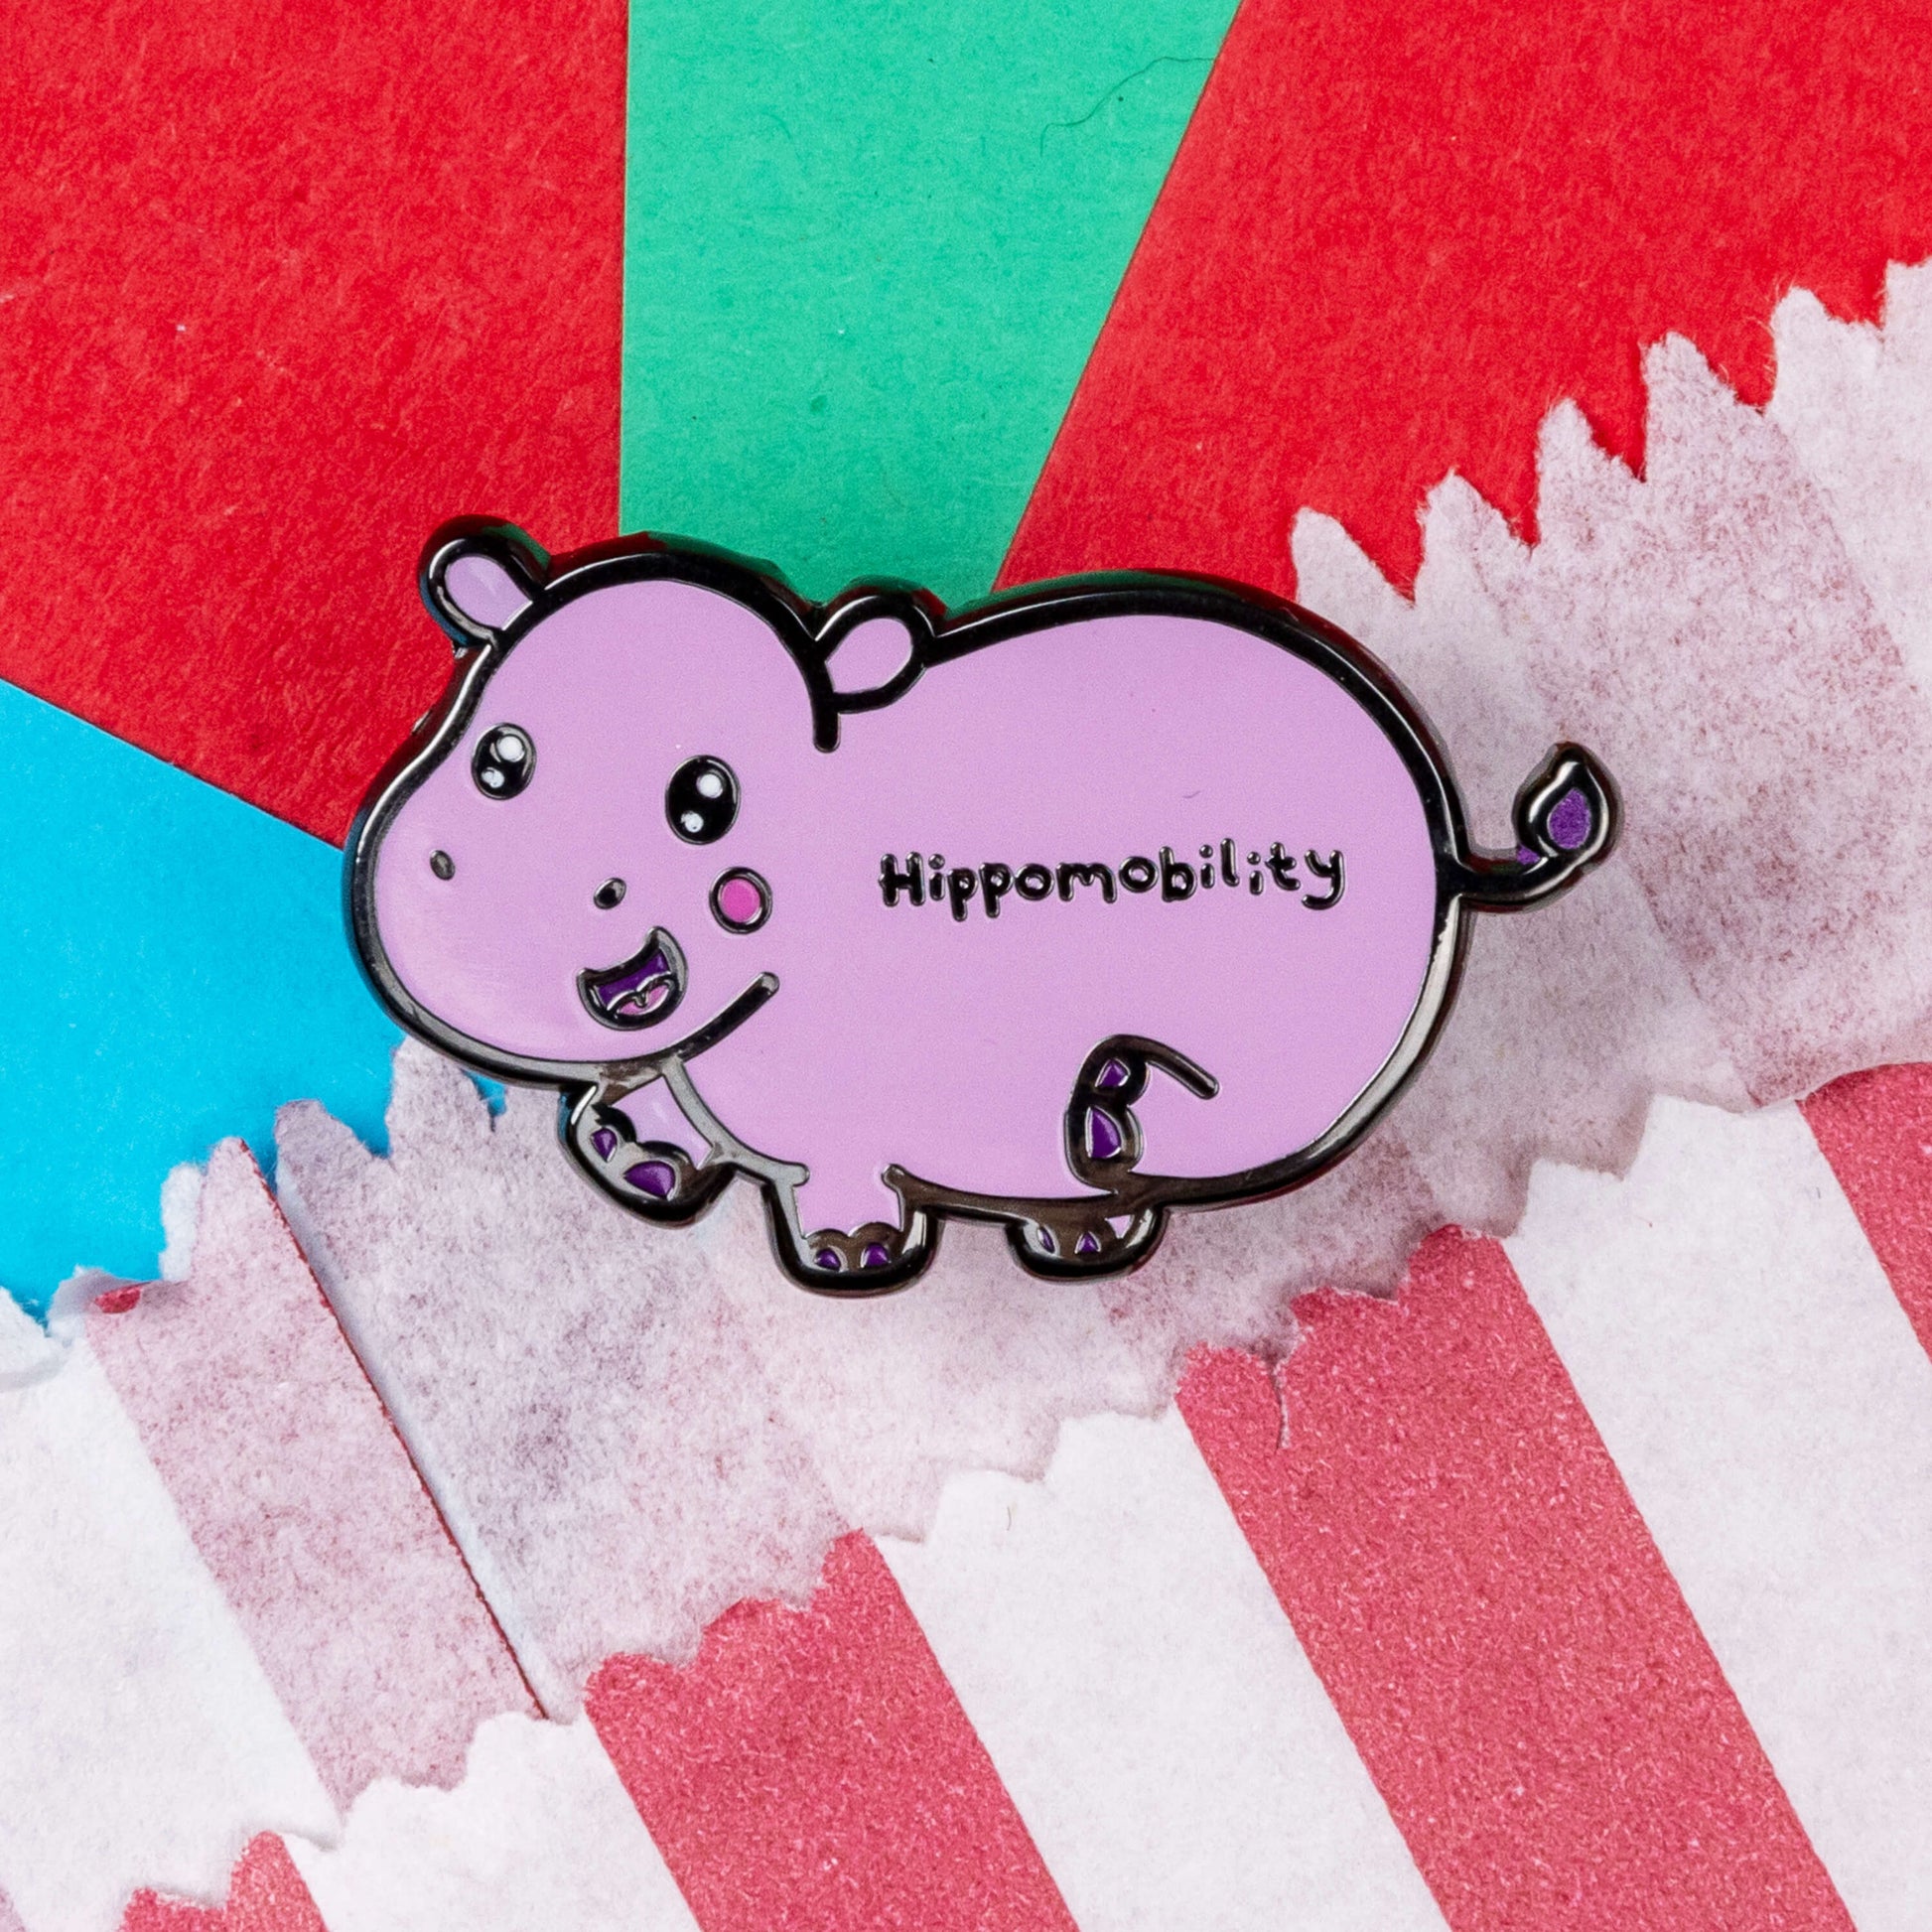 Hippmobility Enamel Pin - Hyper Mobility shown on a red and white striped paper bag on a red, teal and blue background. The enamel pin is of a pink happy hippo with the text hippomobility written on its stomach. The enamel pin is designed to raise awareness for hyper mobility